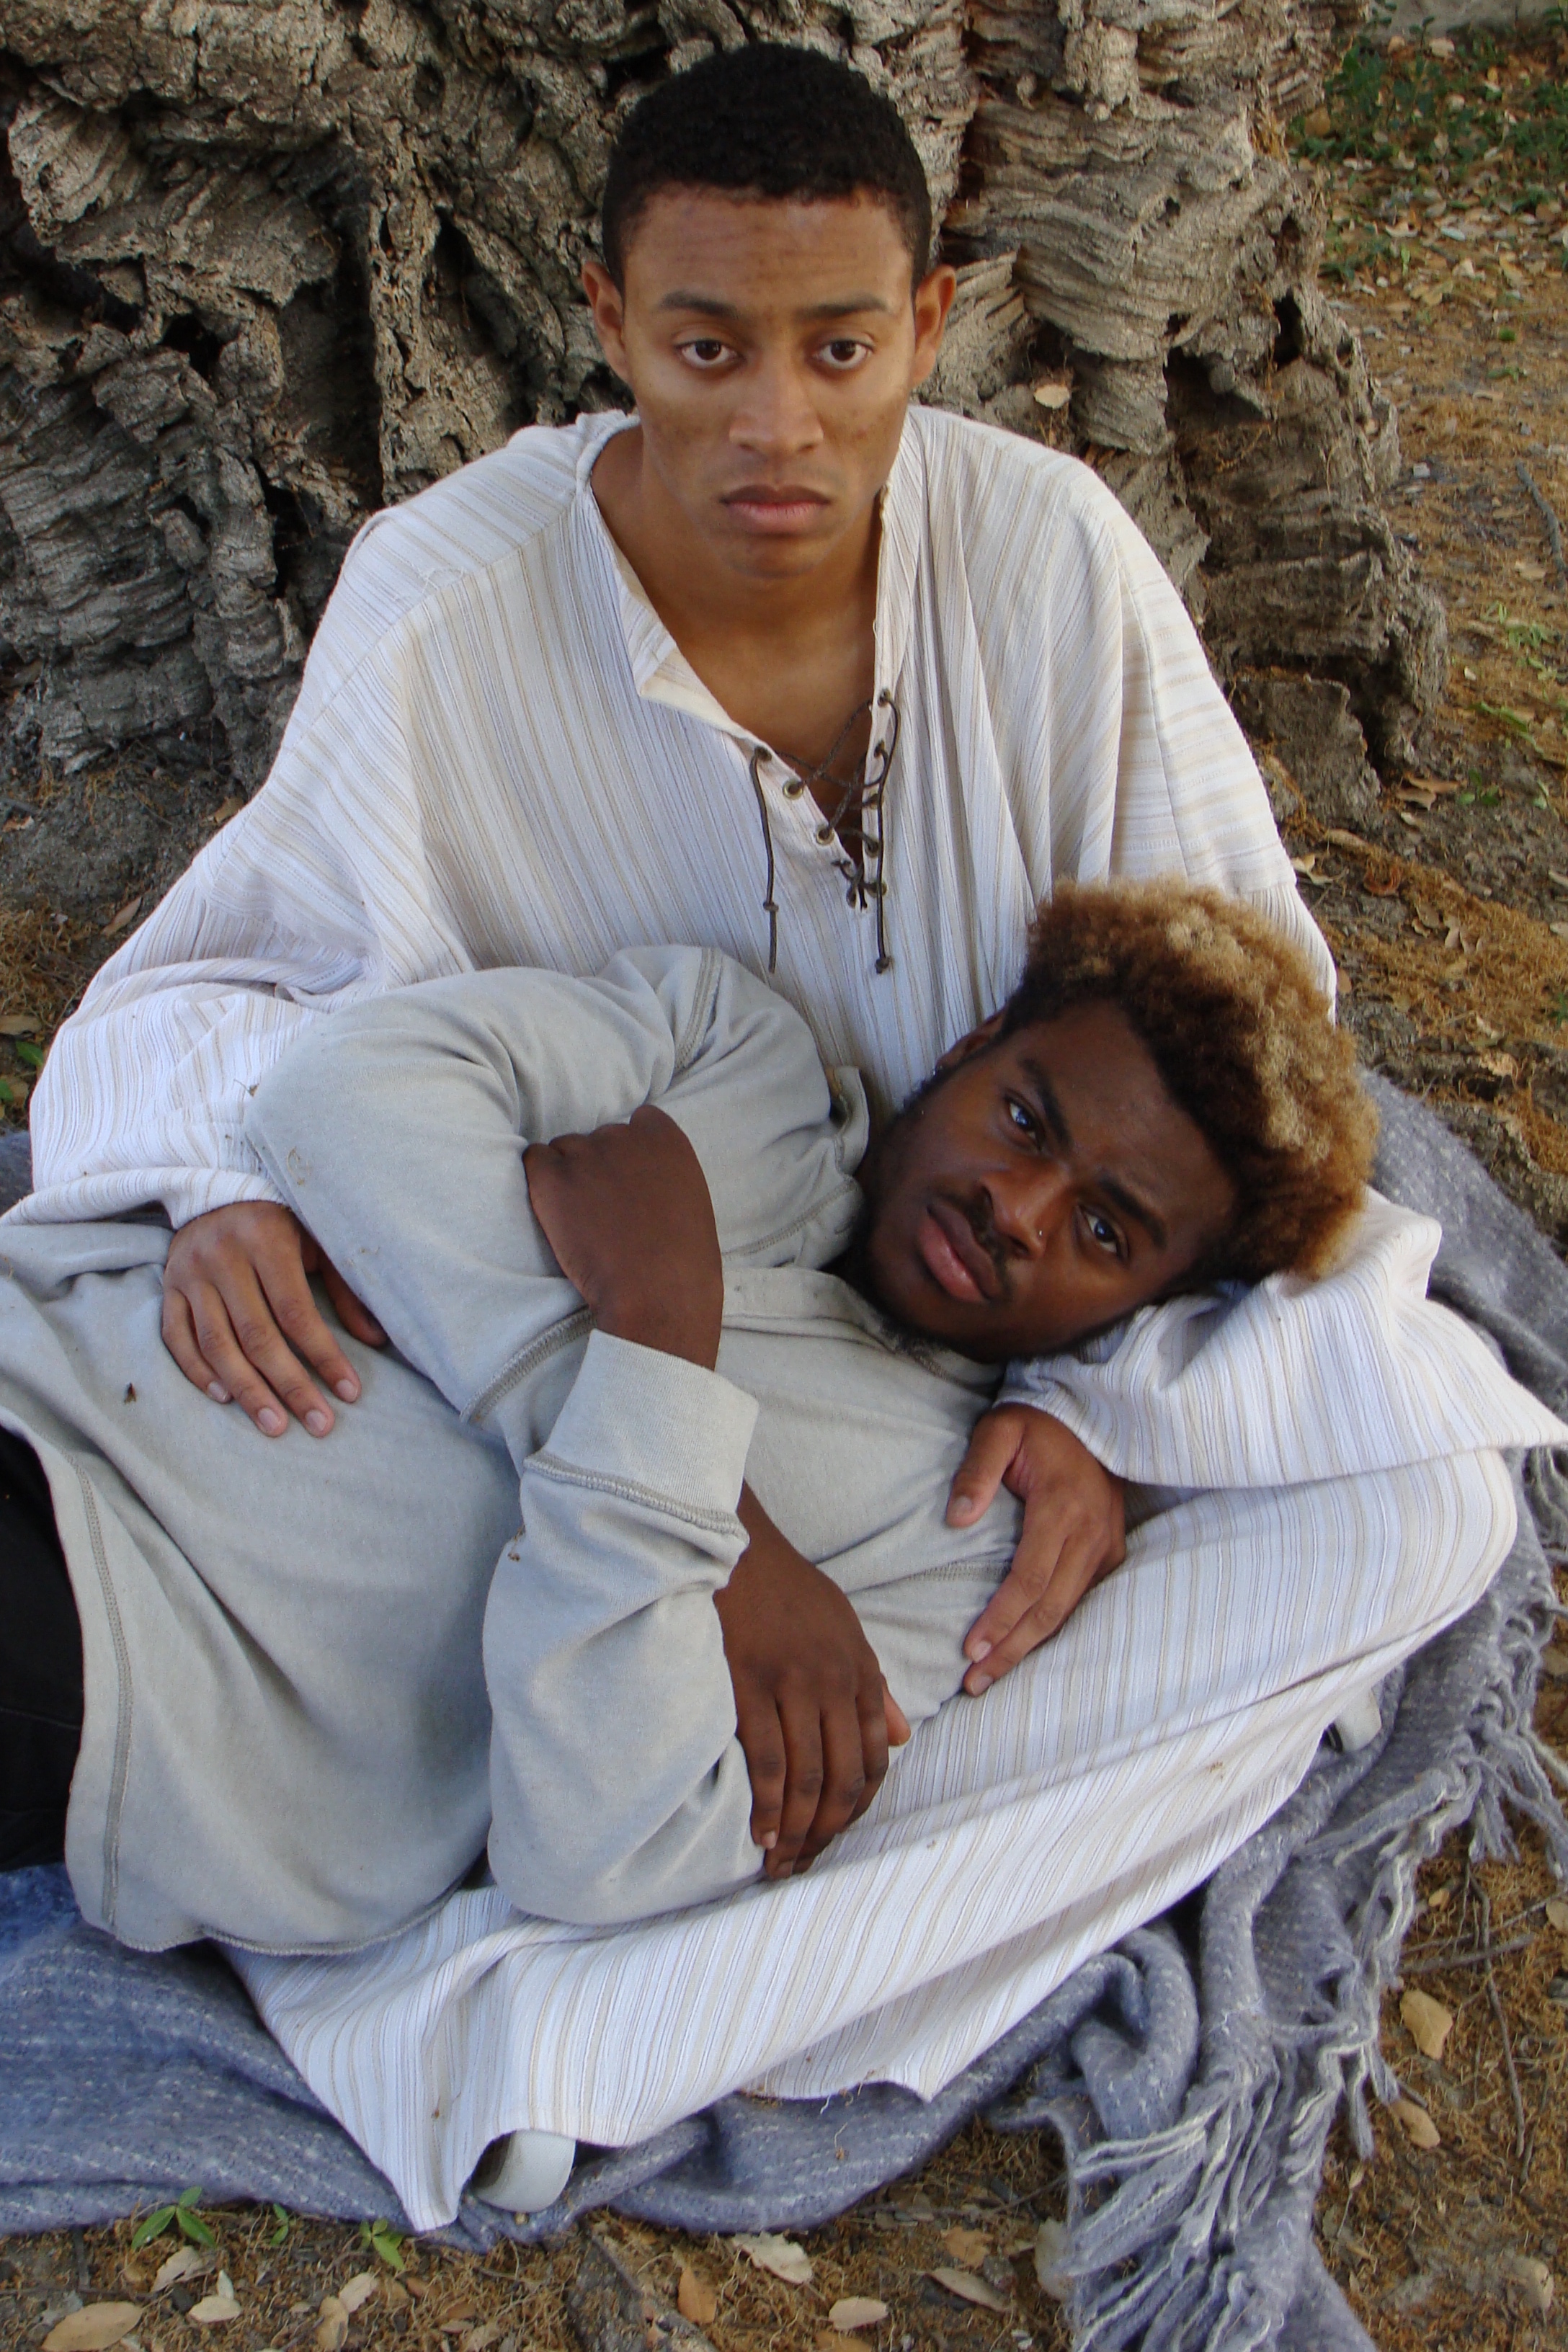 Two Black men wearing white sitting outside, looking up at camera. One of the performers is laying on the other, with his arms crossed. 